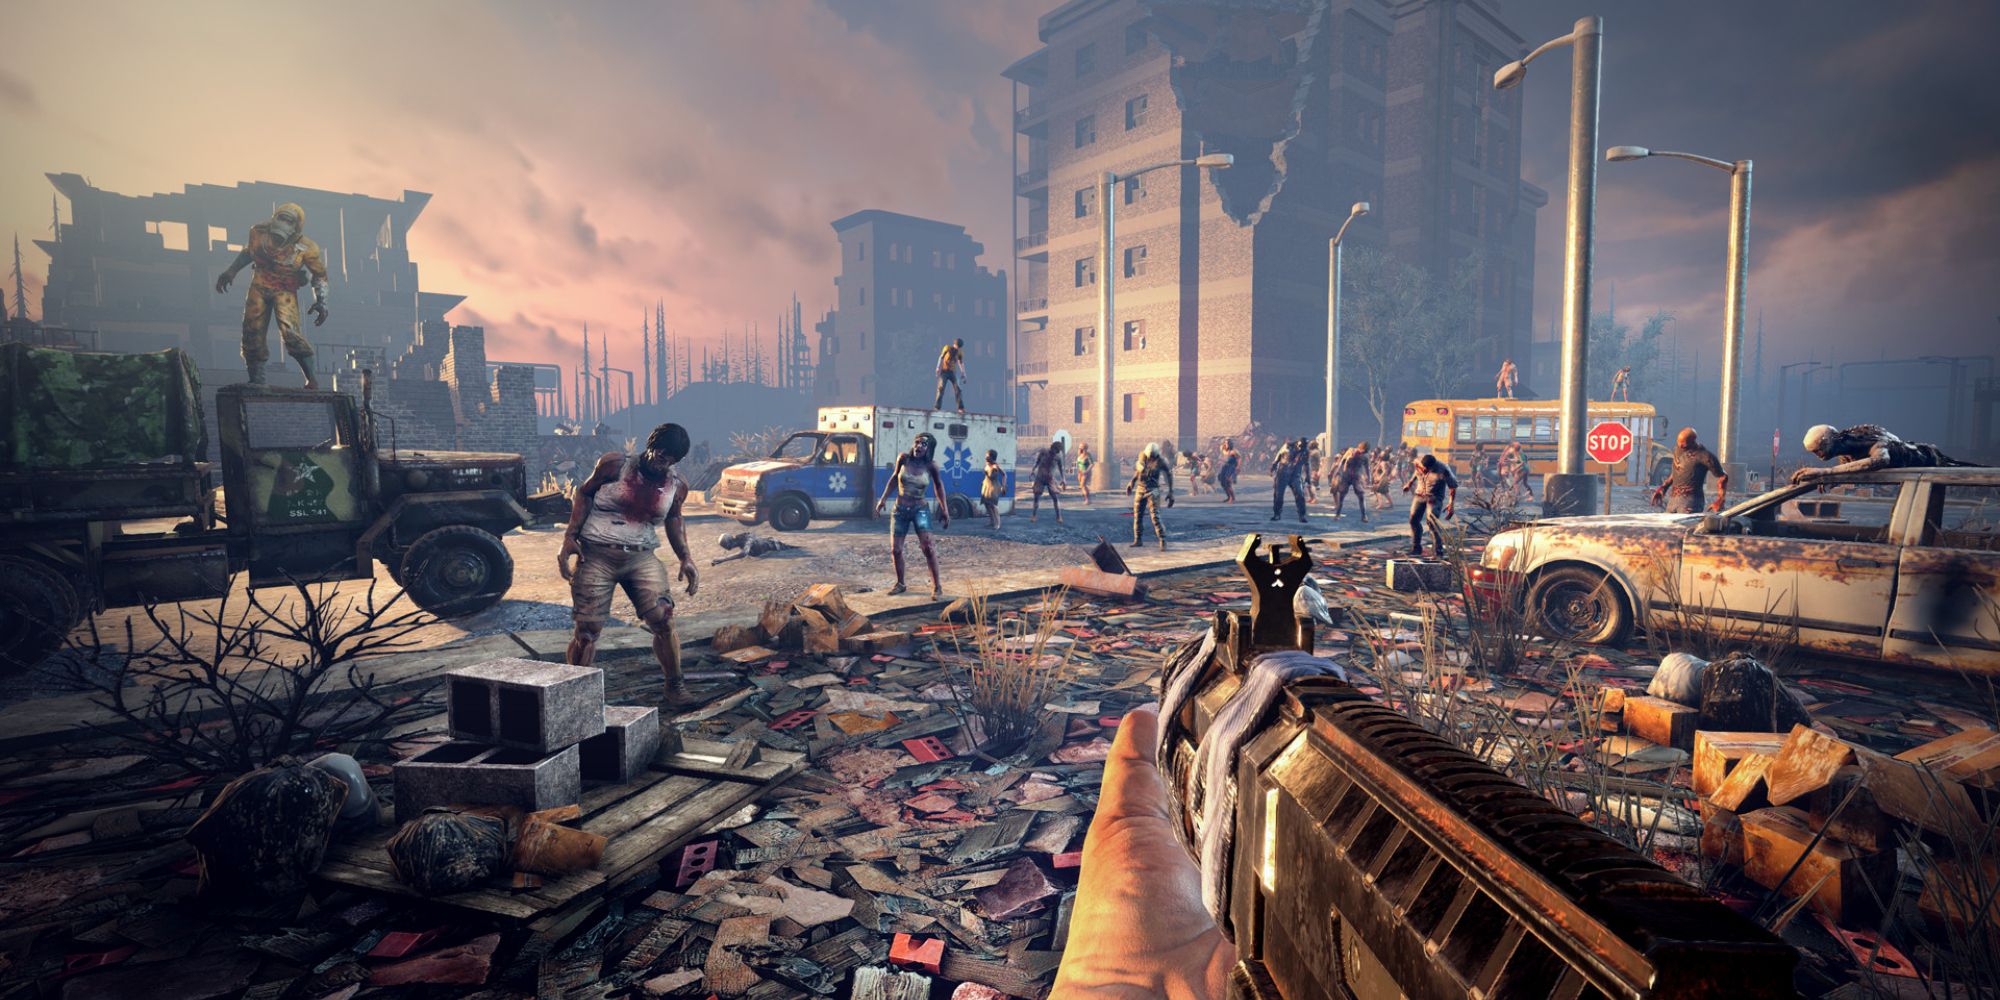 First person perspective holding a machine gun with a horde of zombies ahead